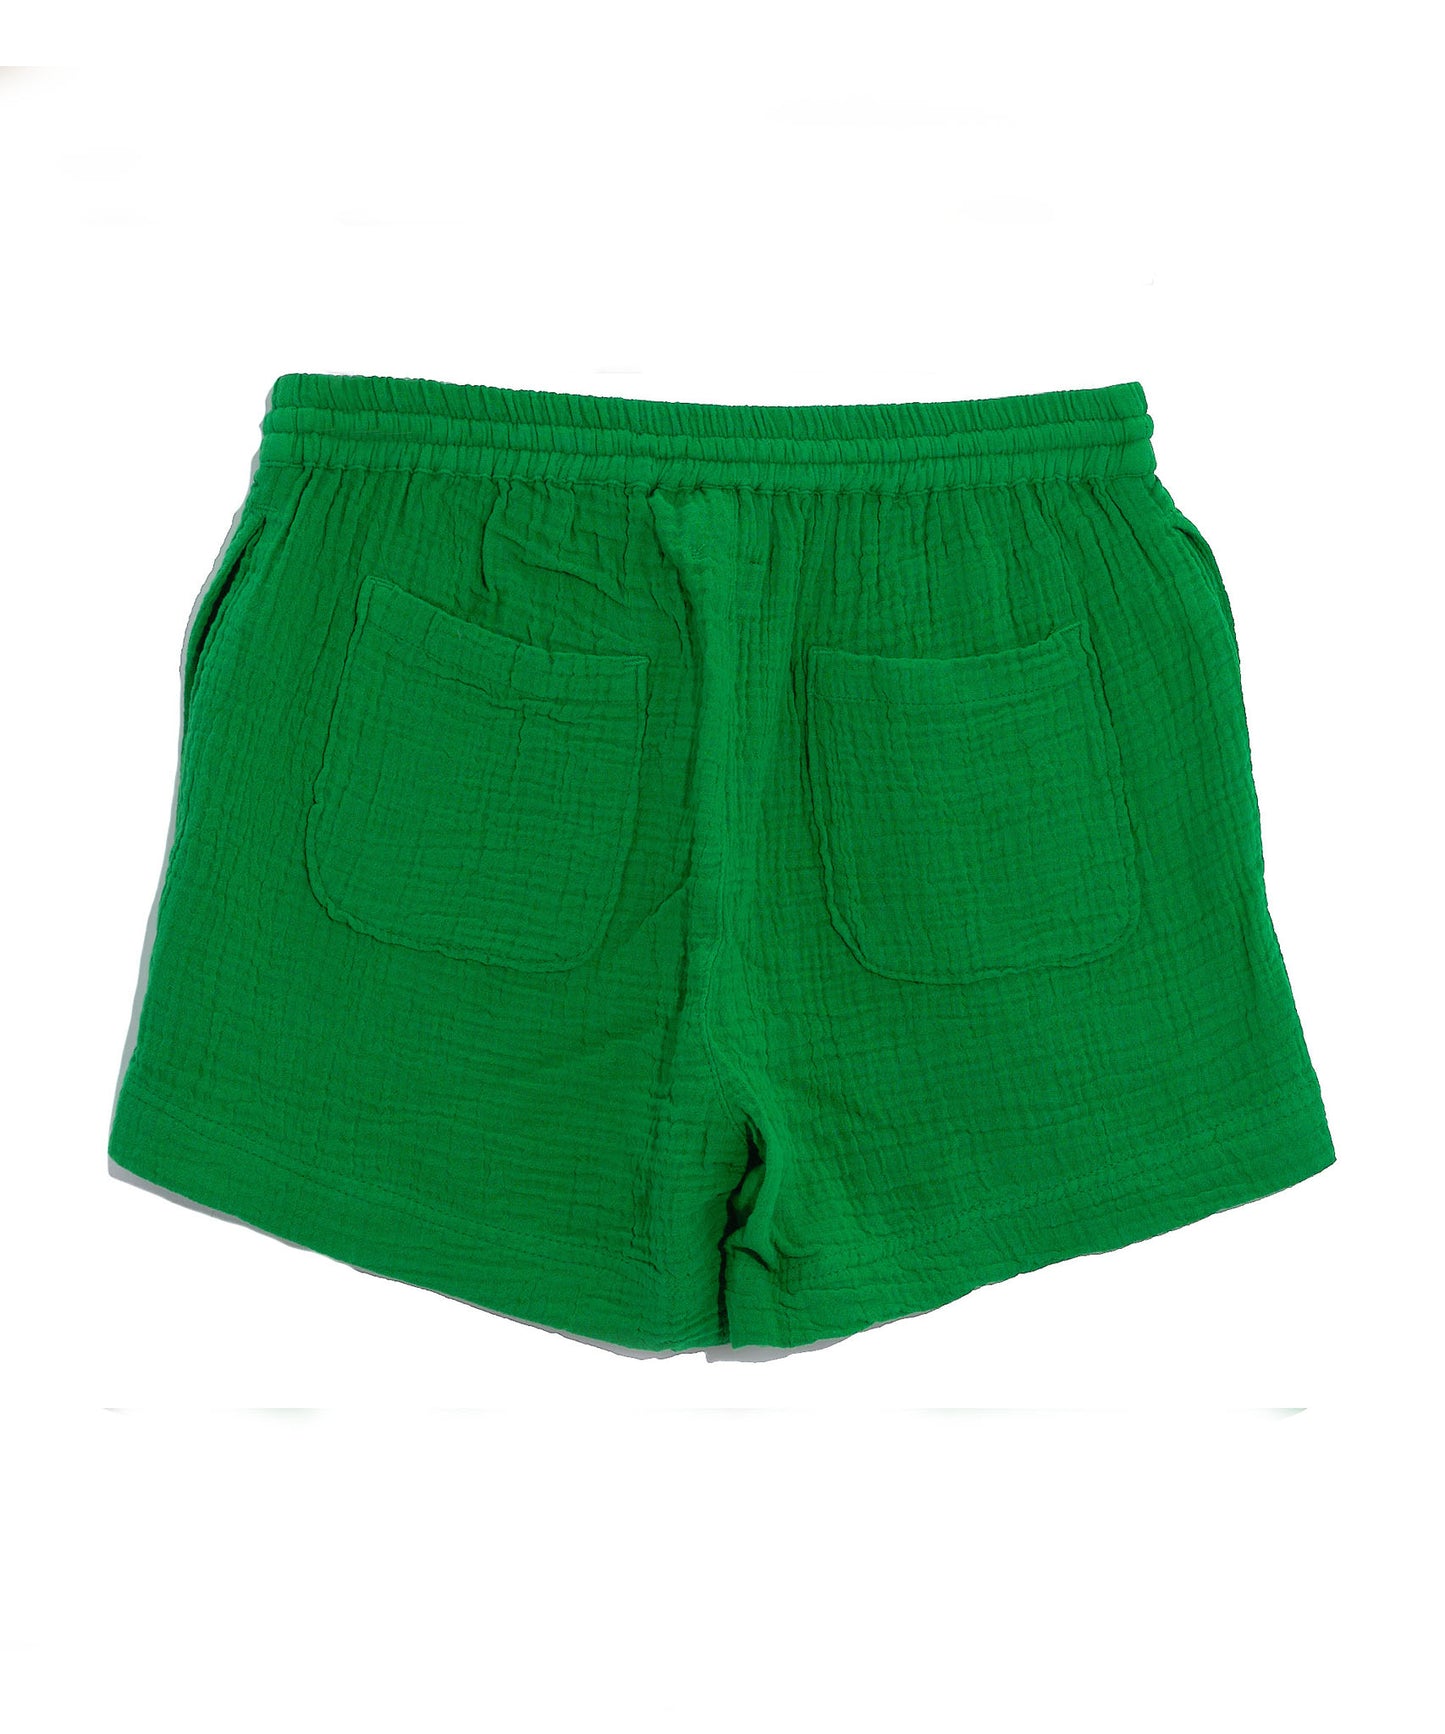 Supersoft Gauze Beach Shorts in color Amazon Green